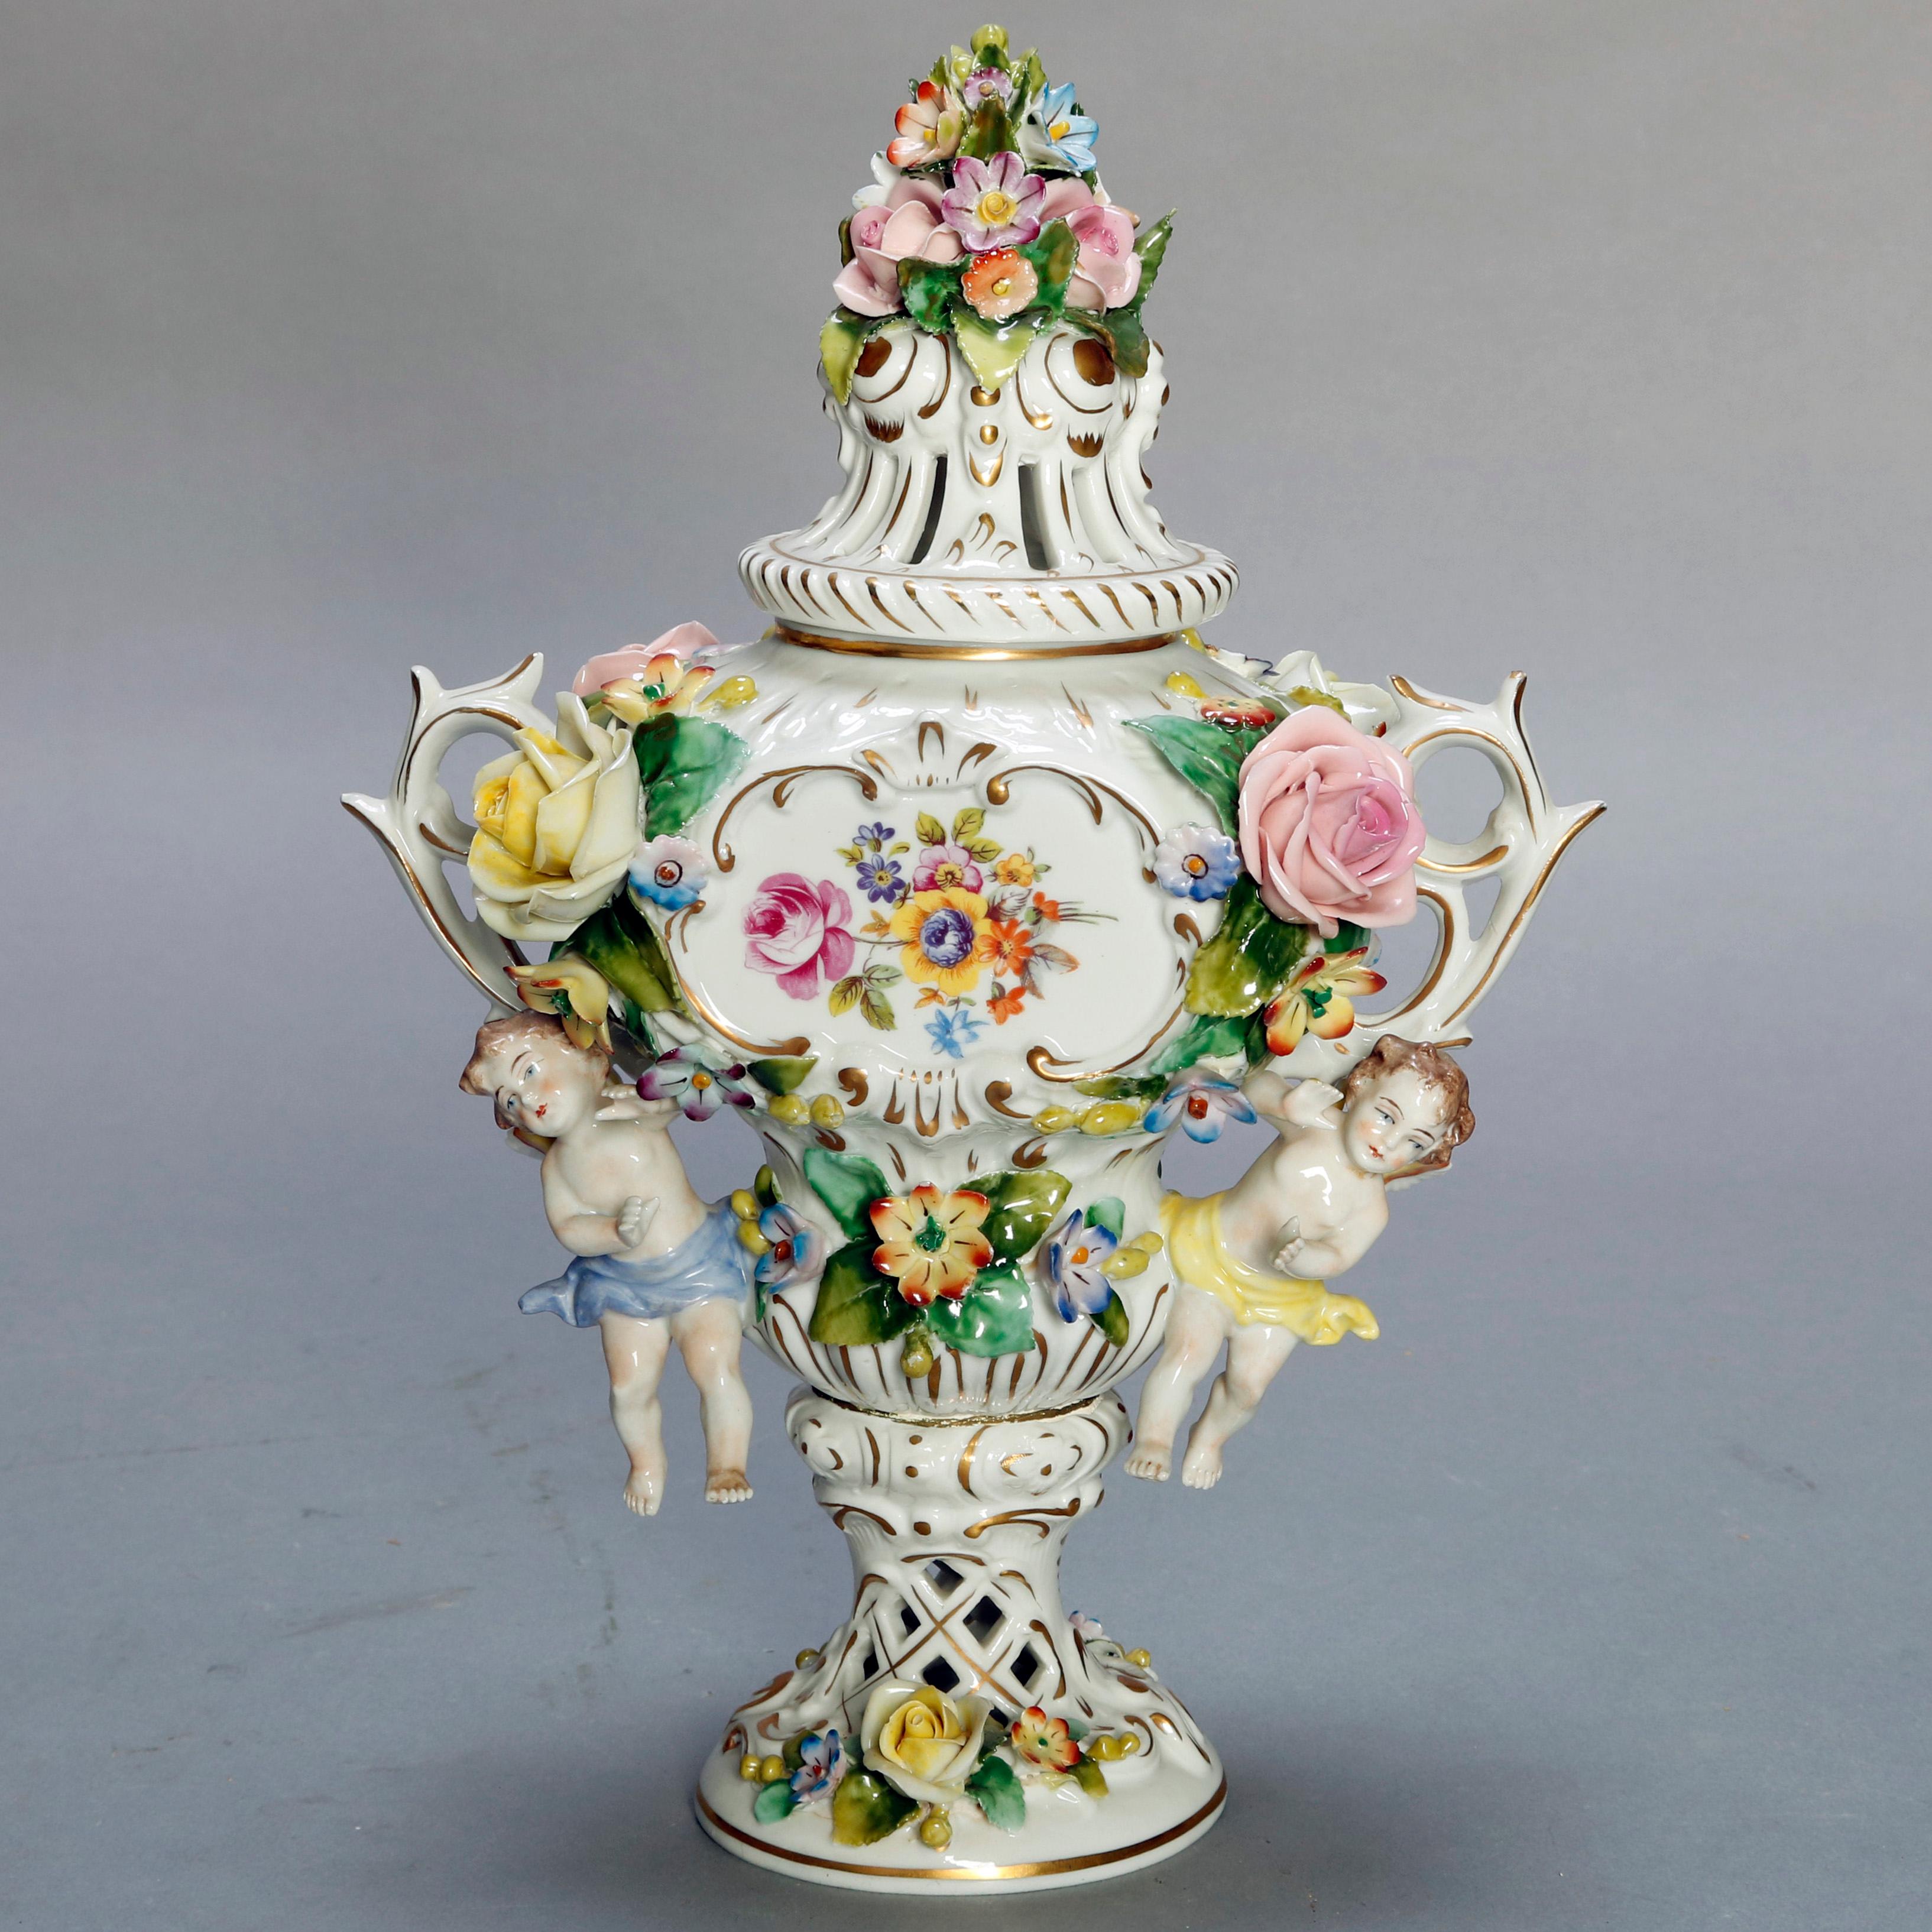 An antique pair of classical German Dresden Sitzendorf porcelain urns each offer central hand painted floral reserves, pierced floral lids, double stick form handles with cherubs, overall applied flowers, raised on pierced plinth with garden